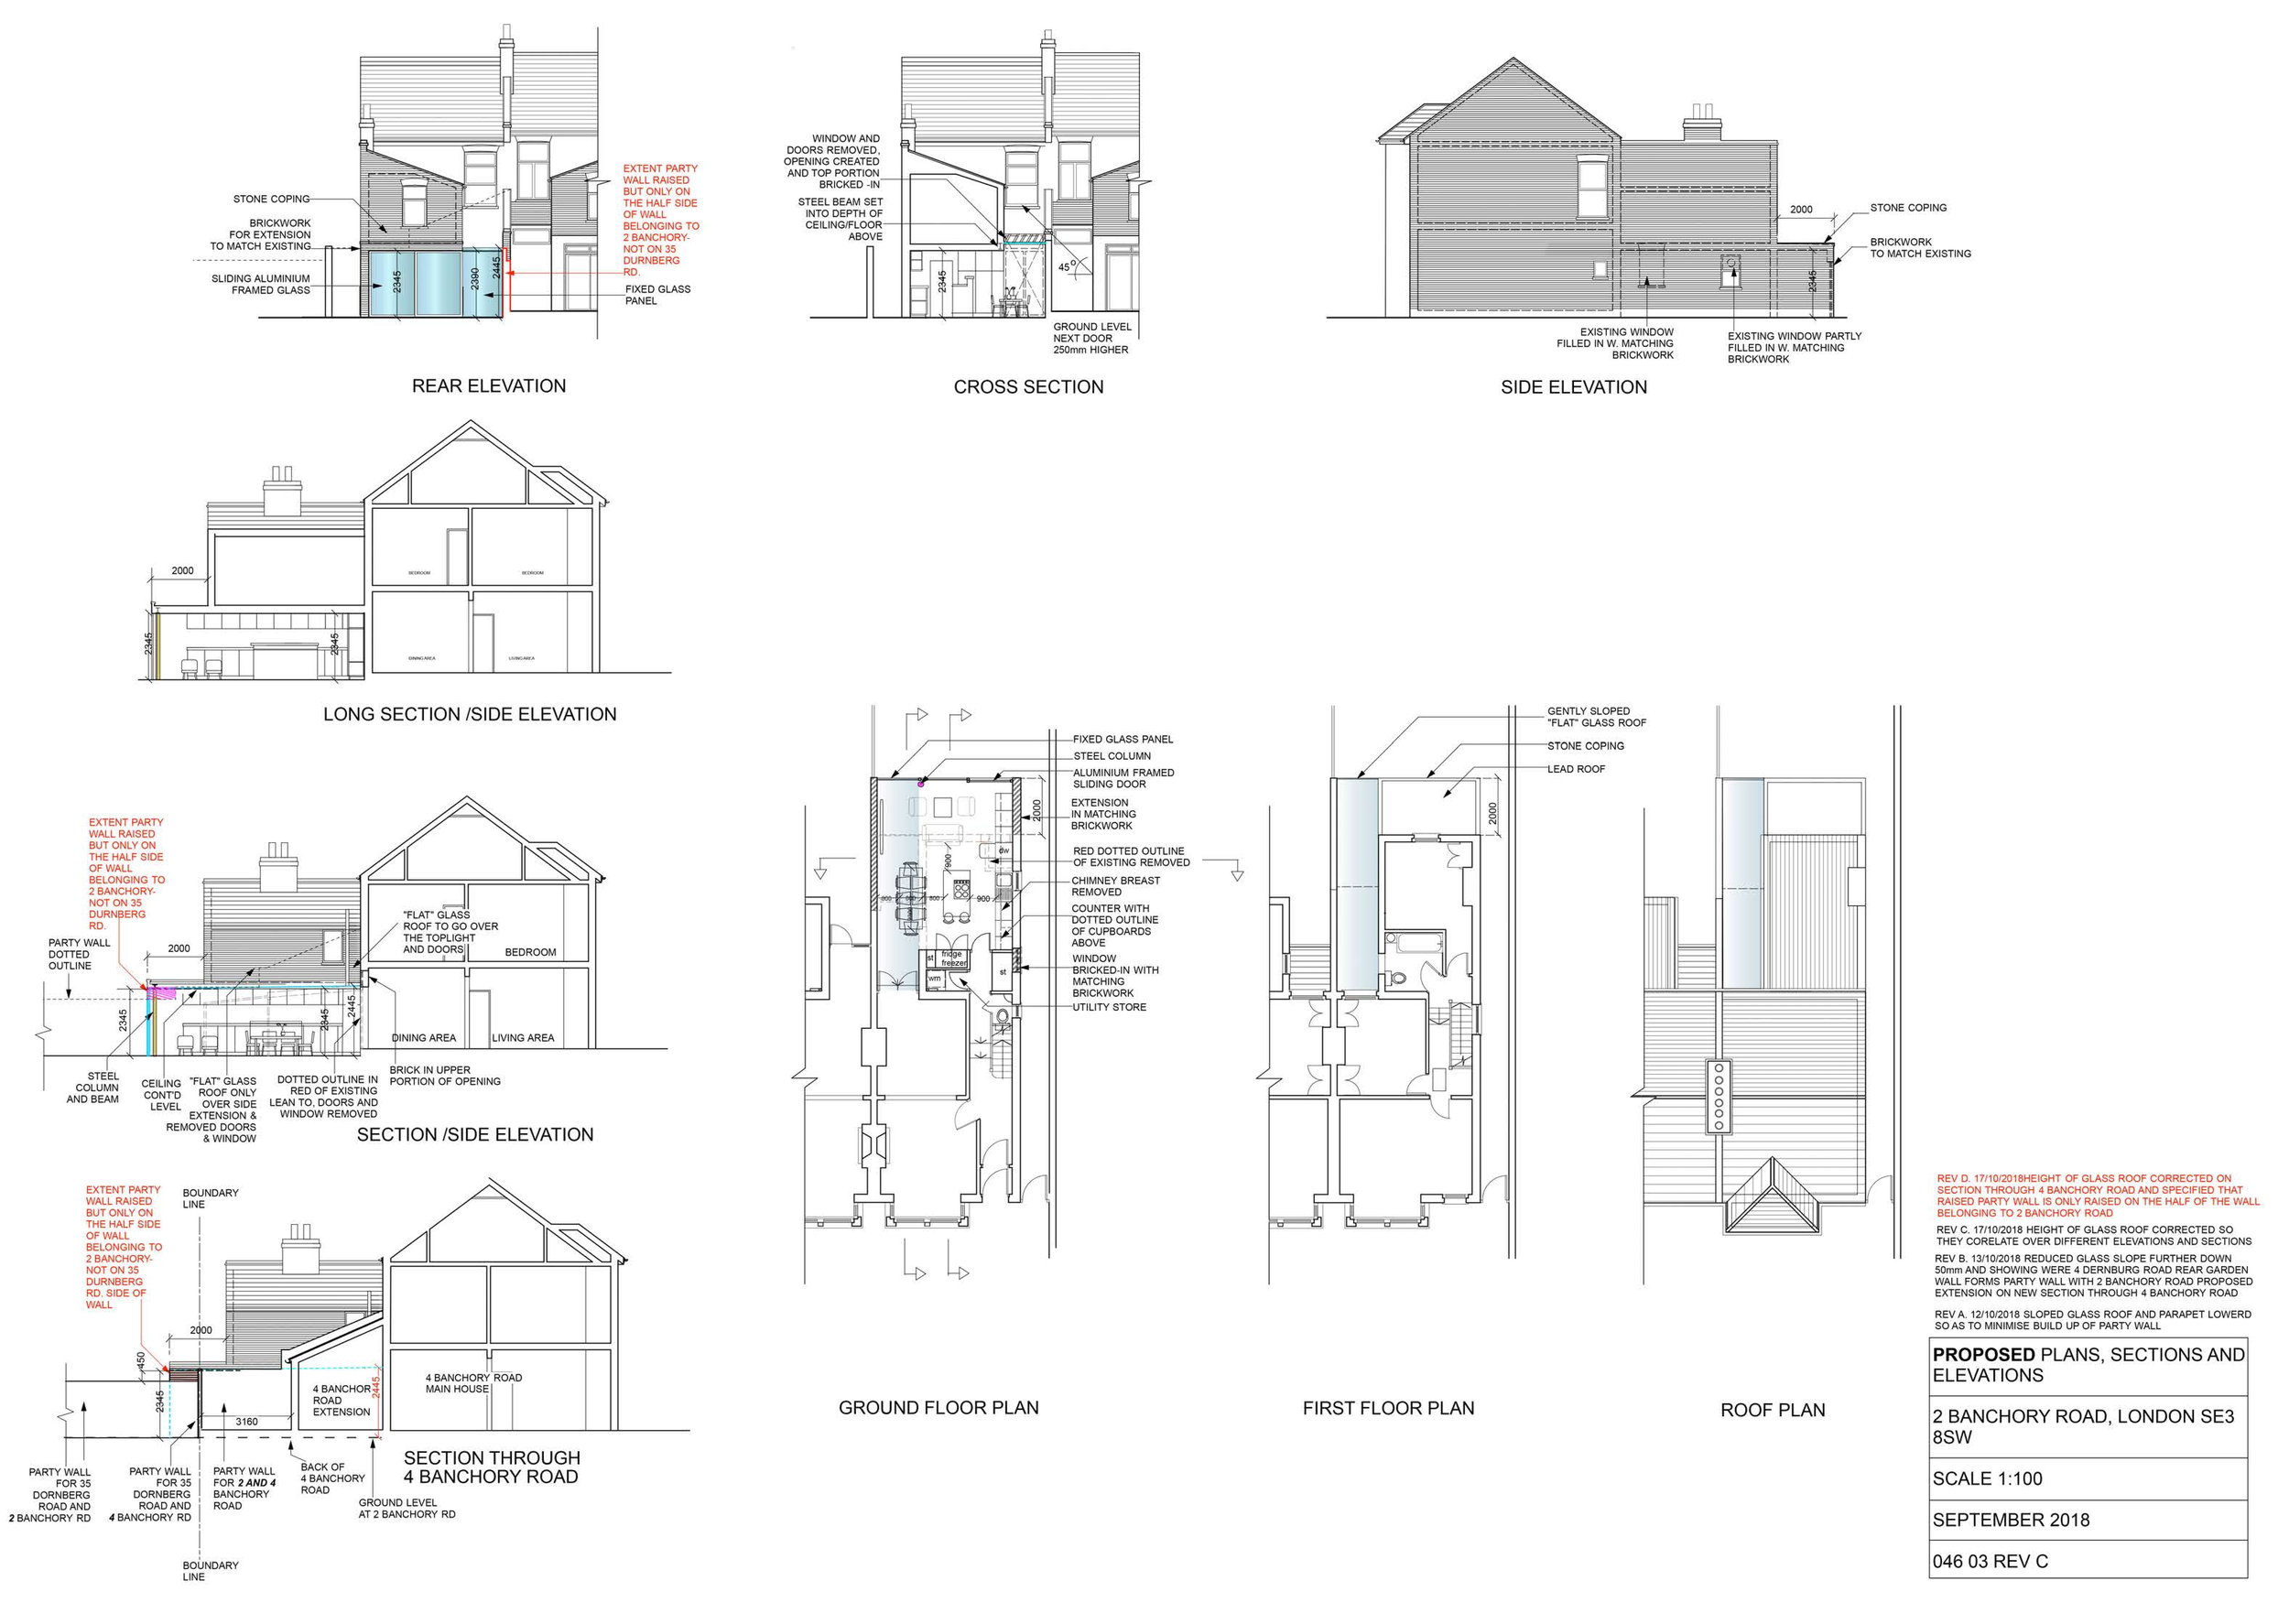 046 03 REV D PROPOSED PLANS SECTIONS AND ELEVATIONS-Backup-20180701191937-Backup-20180912183245-1.jpg